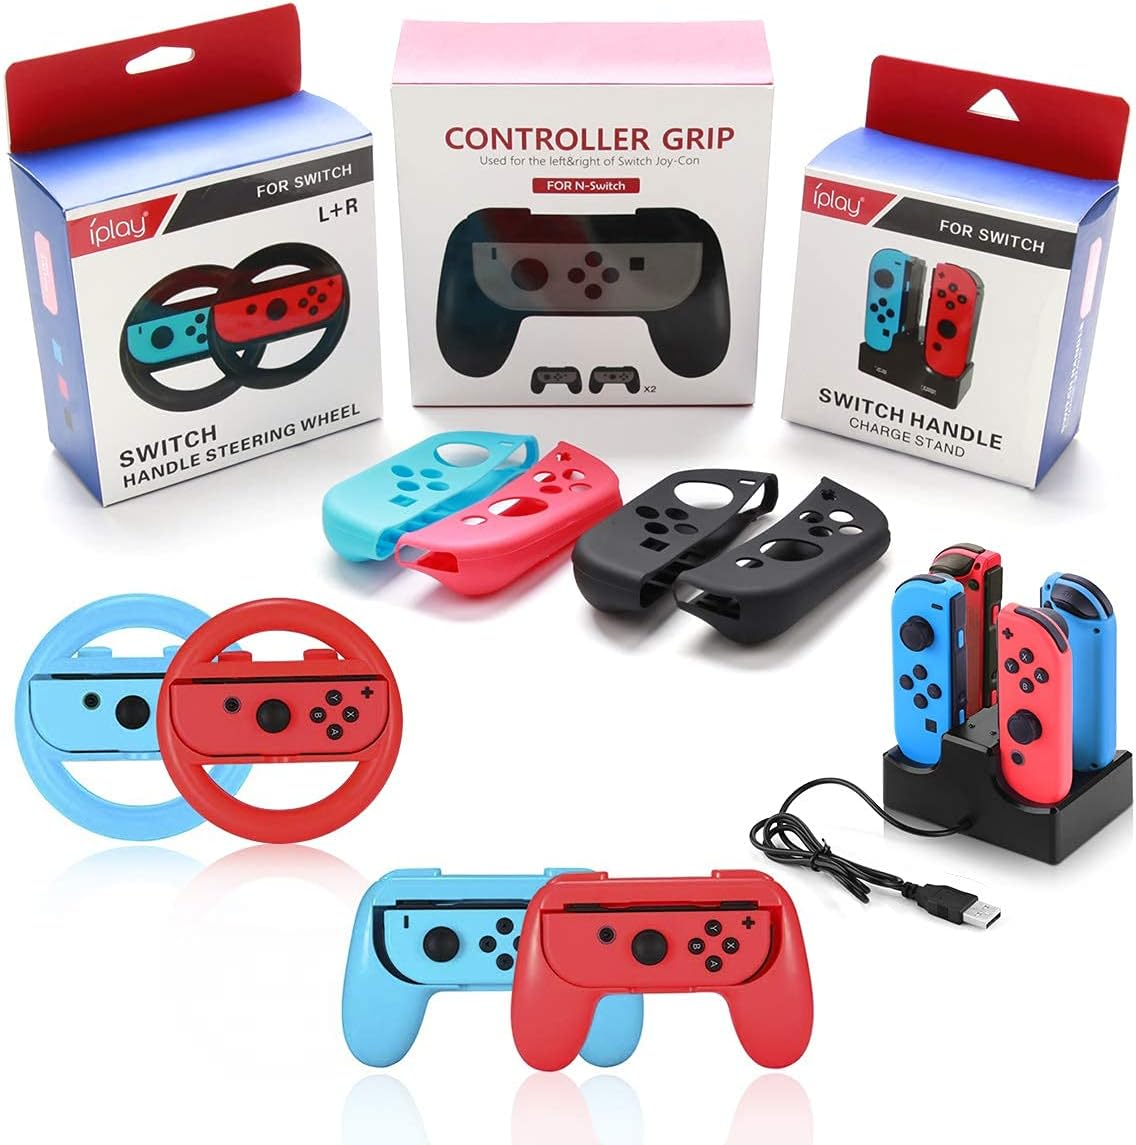 Accessories Bundle for Nintendo Switch, Kit with Carrying Case,Protective Case with Screen Protector,Compact Playstand,Game Case,Joystick Cap,Charging Dock,Grip and Steering Wheel for Nintendo Switch